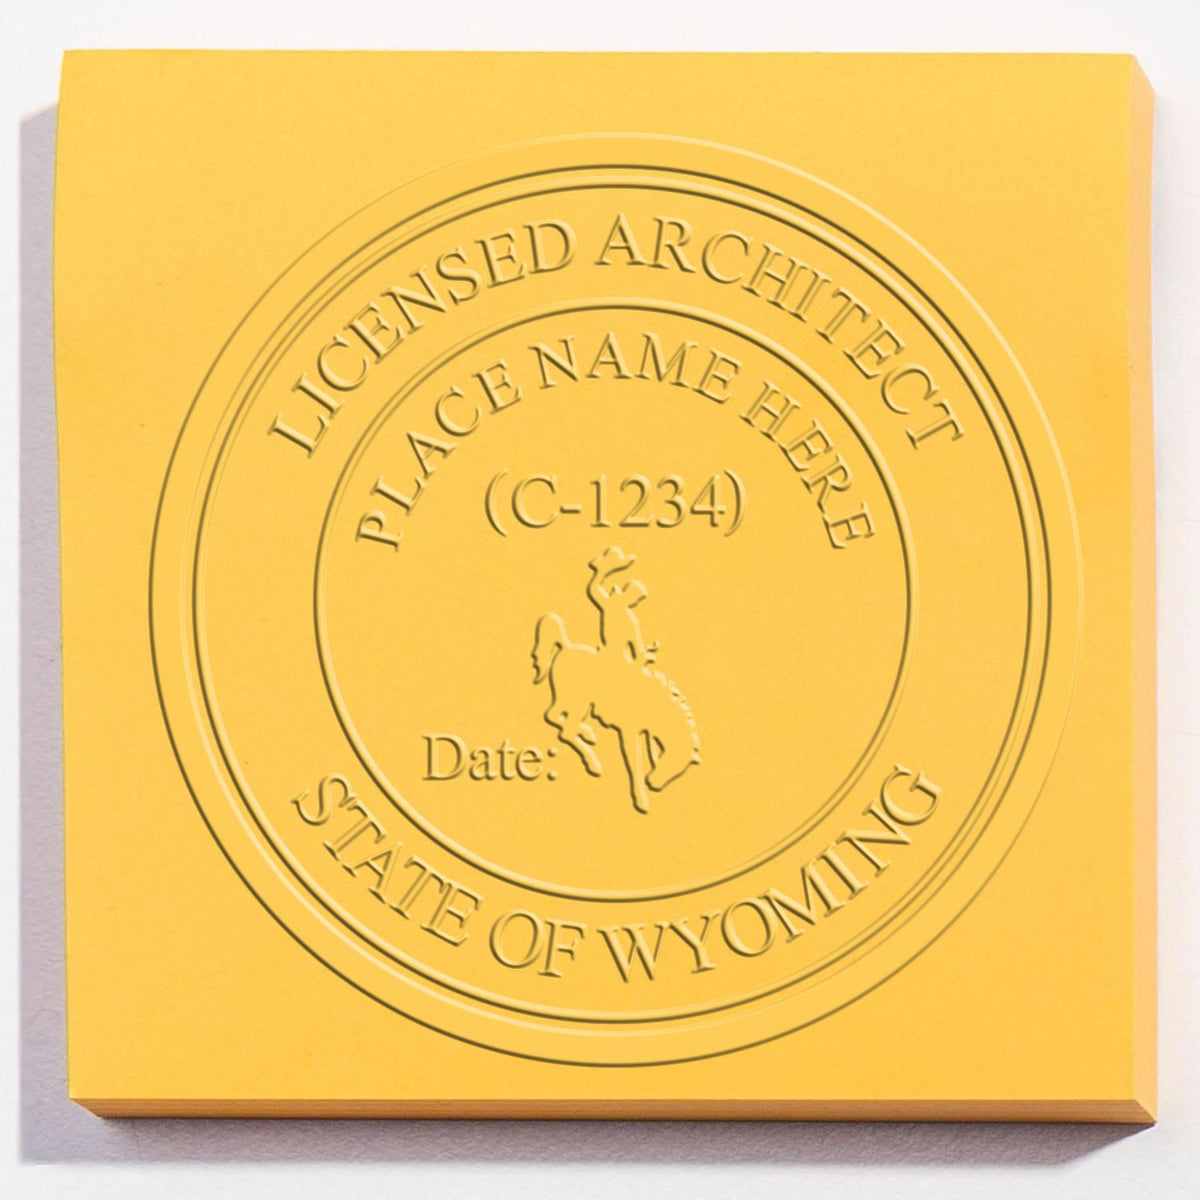 An in use photo of the Hybrid Wyoming Architect Seal showing a sample imprint on a cardstock